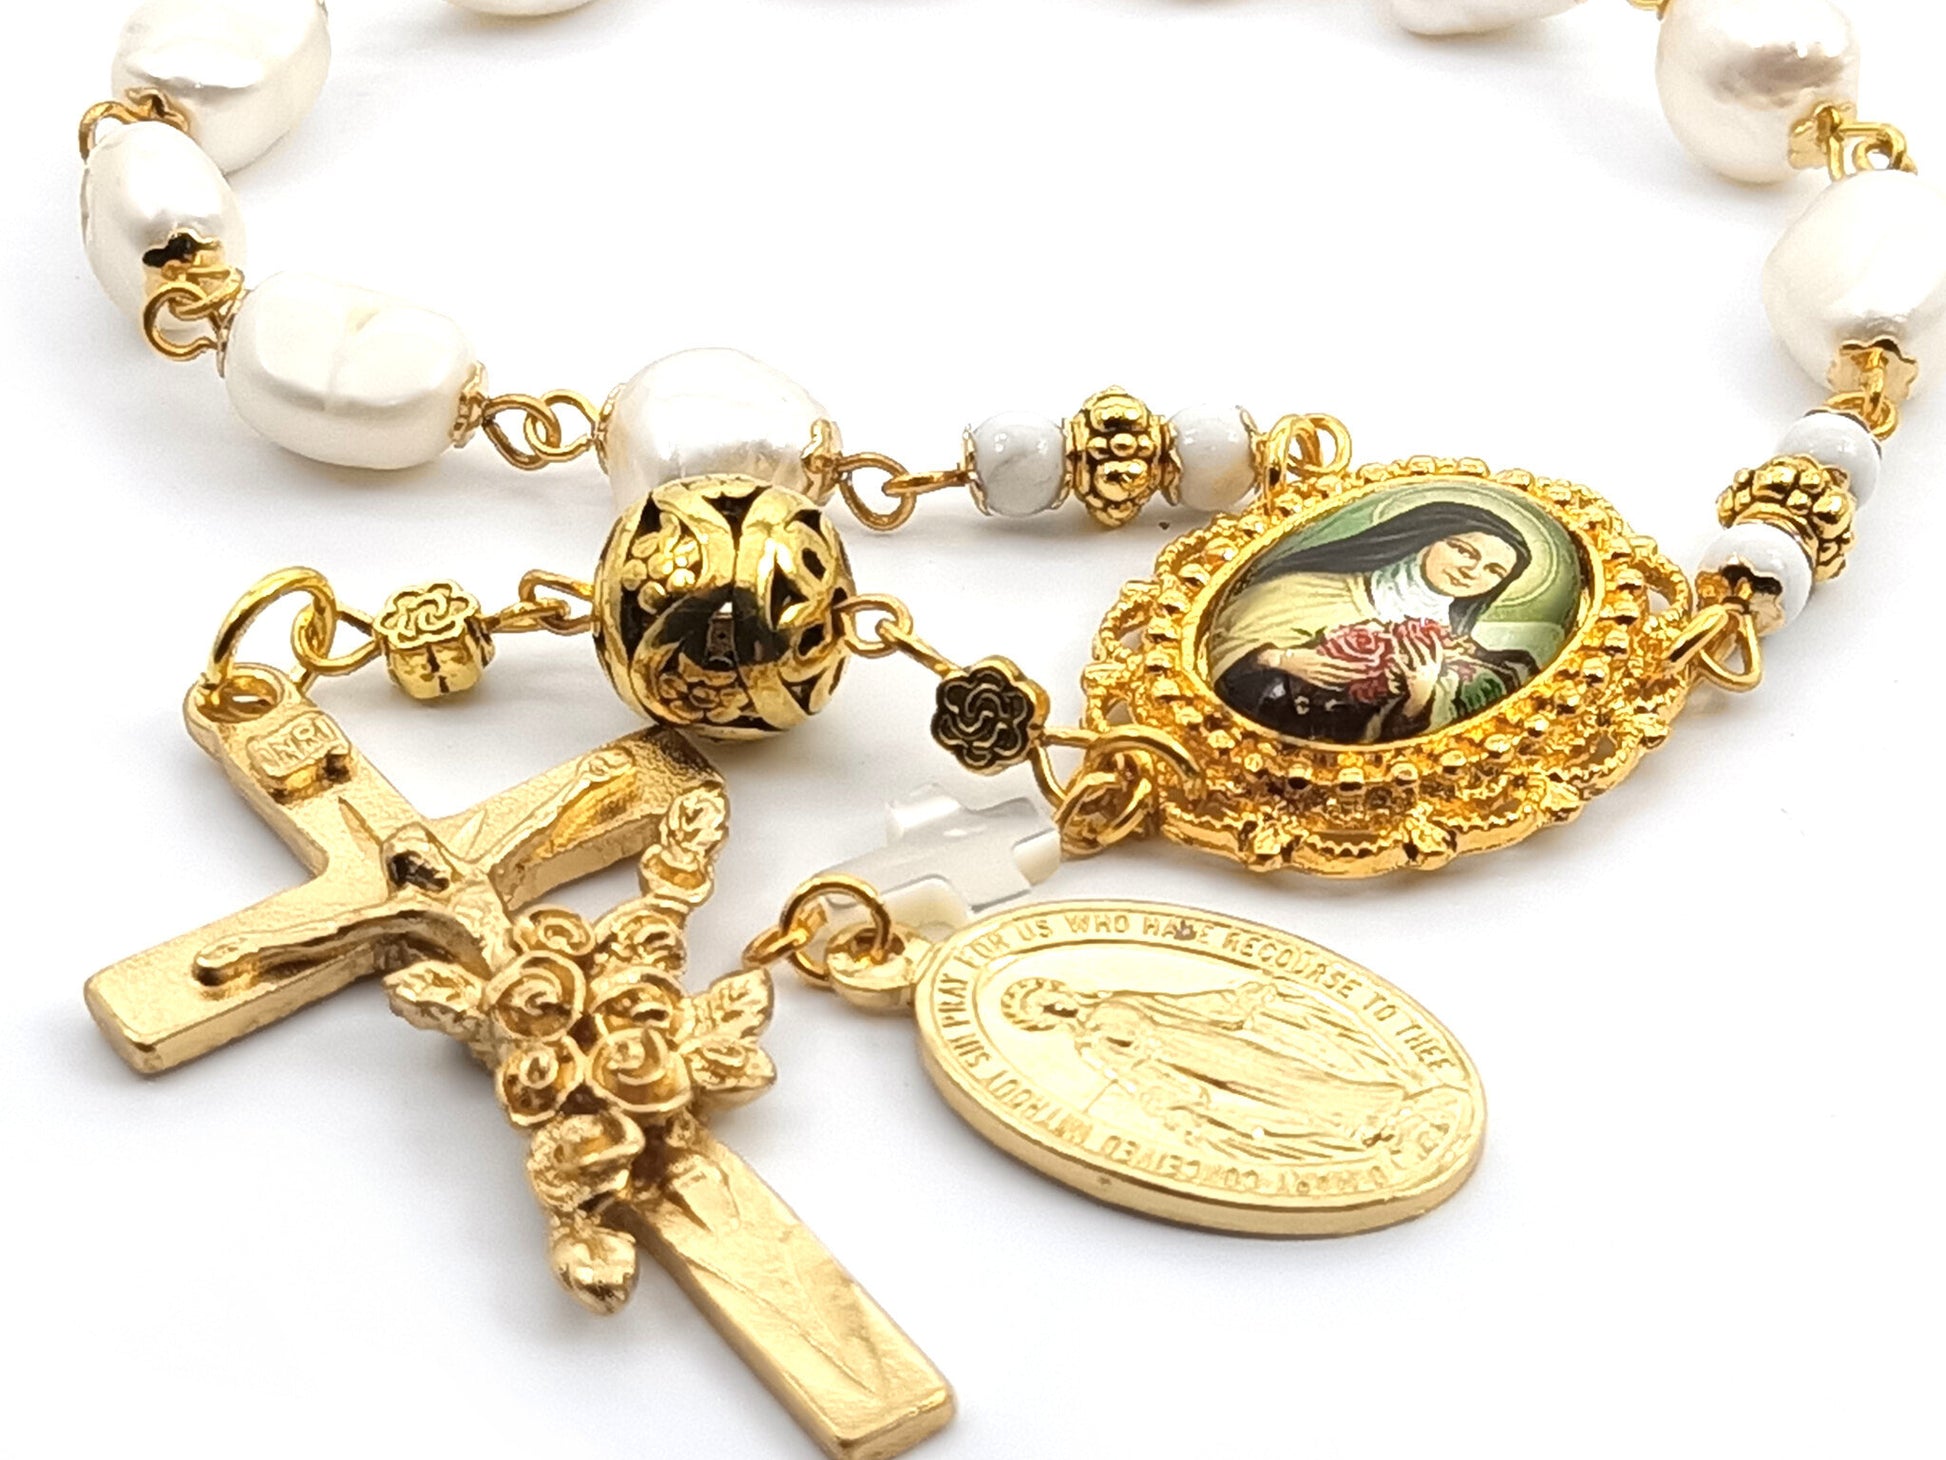 Genuine pearl unique rosary beads single decade with gold crucifix, miraculous medal and Saint Therese of Lisieux picture medal.